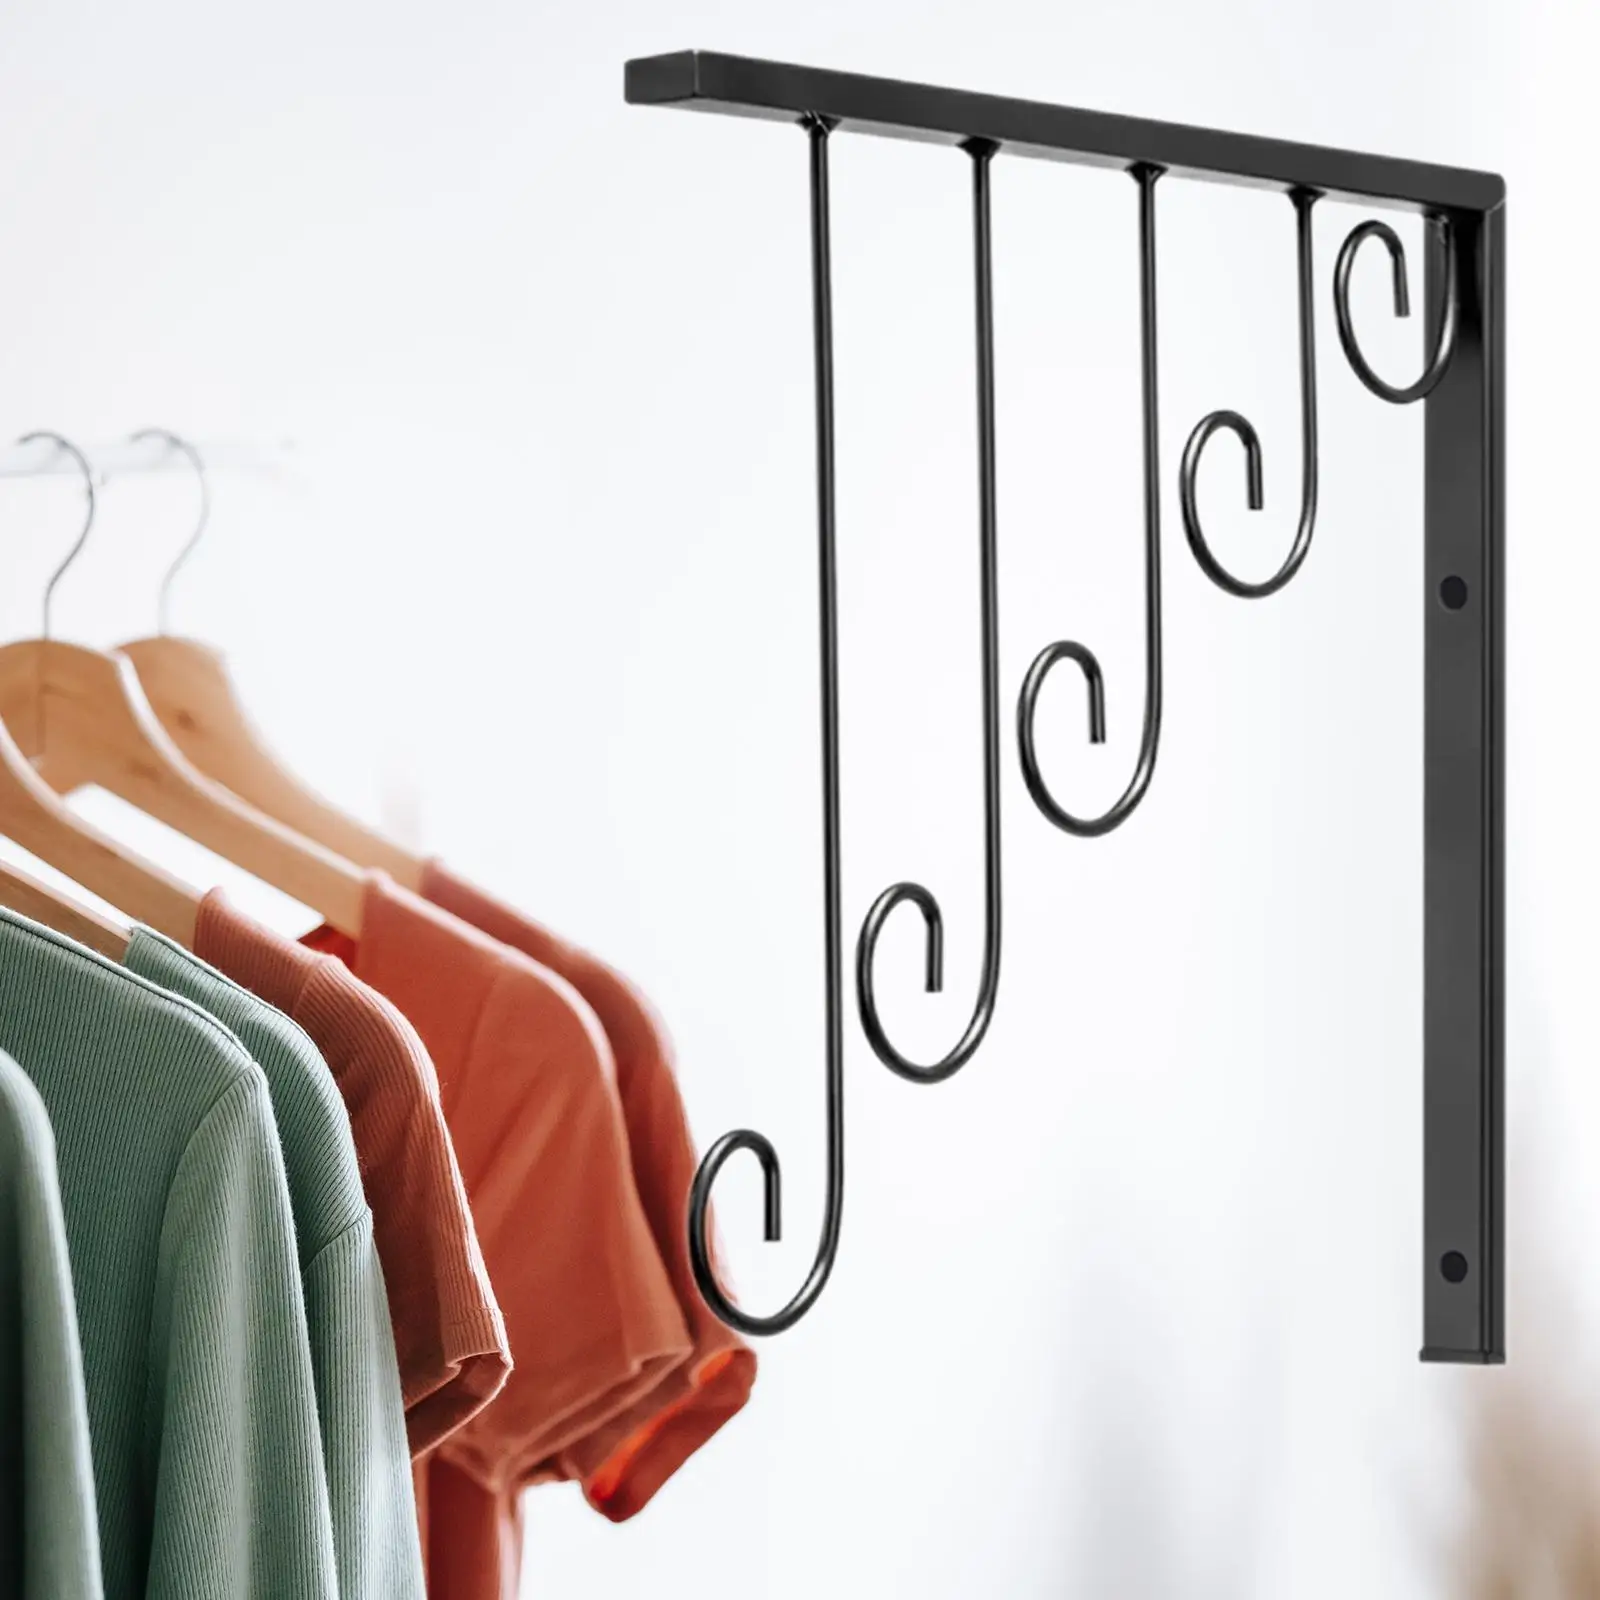 Wrought Iron Hangers Wall Mount Easy Installation Durable Hanging Clothes Display Rack for Home Coat Pants Jeans Clothes Storage